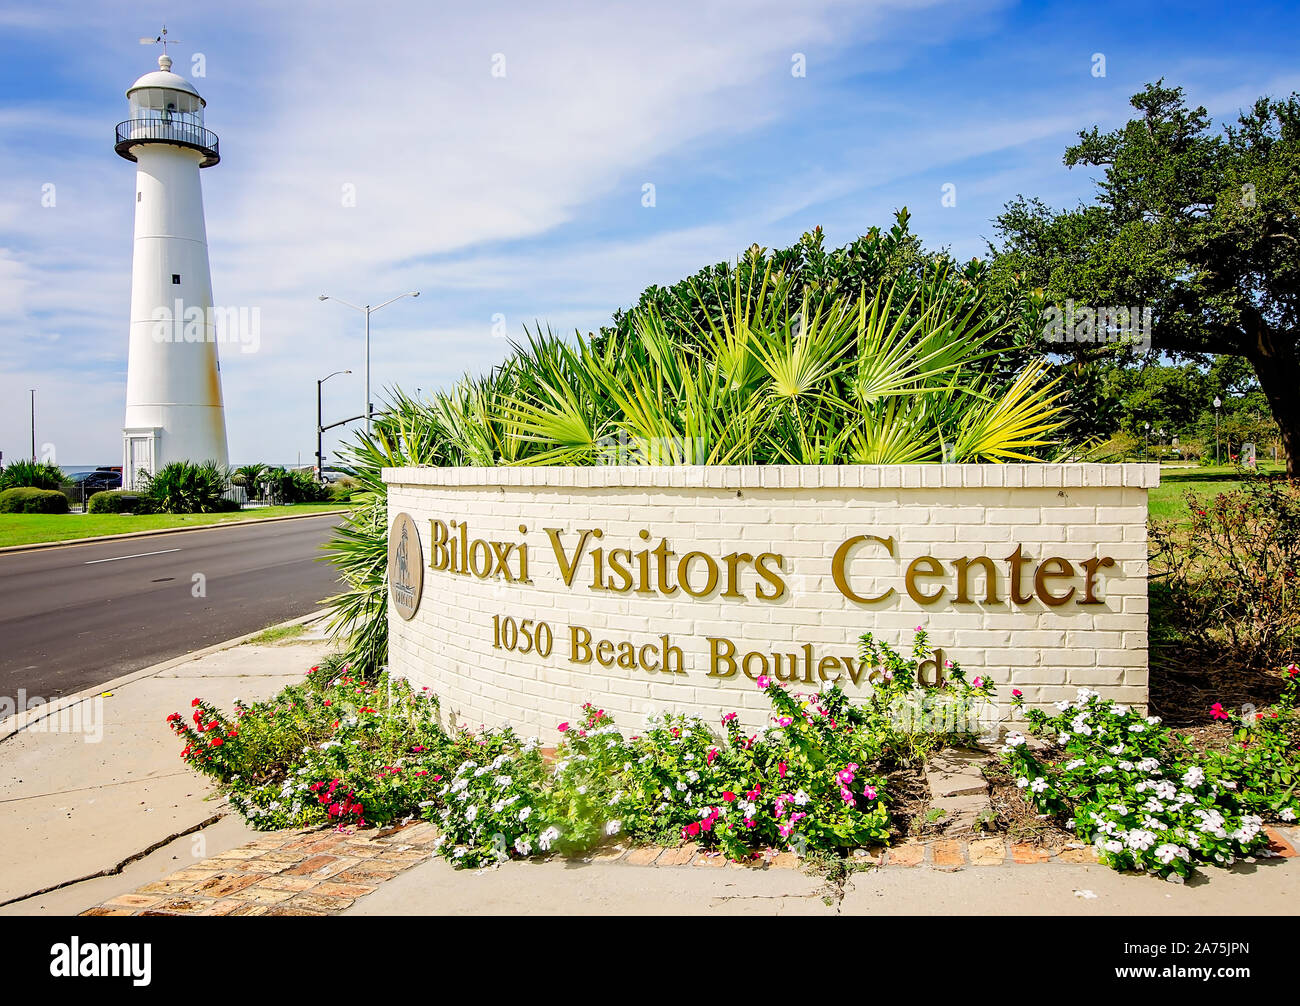 The Biloxi Lighthouse and entrance to the Biloxi Visitors Center are pictured, Oct. 22, 2019, in Biloxi, Mississippi. Stock Photo